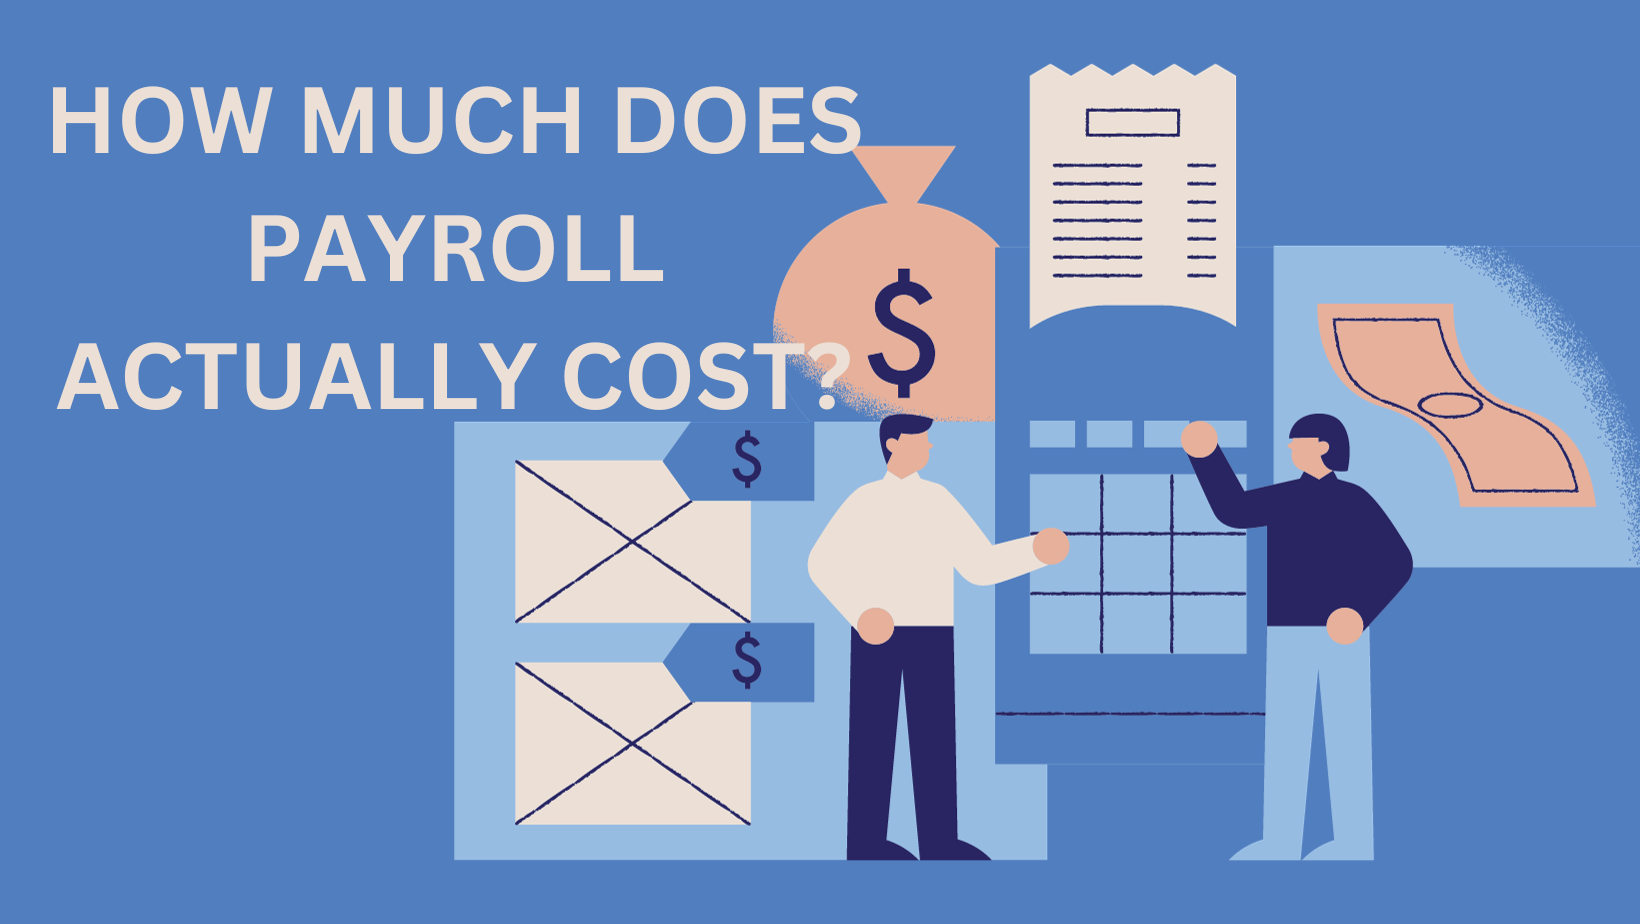 alt = "payroll costs you should know"